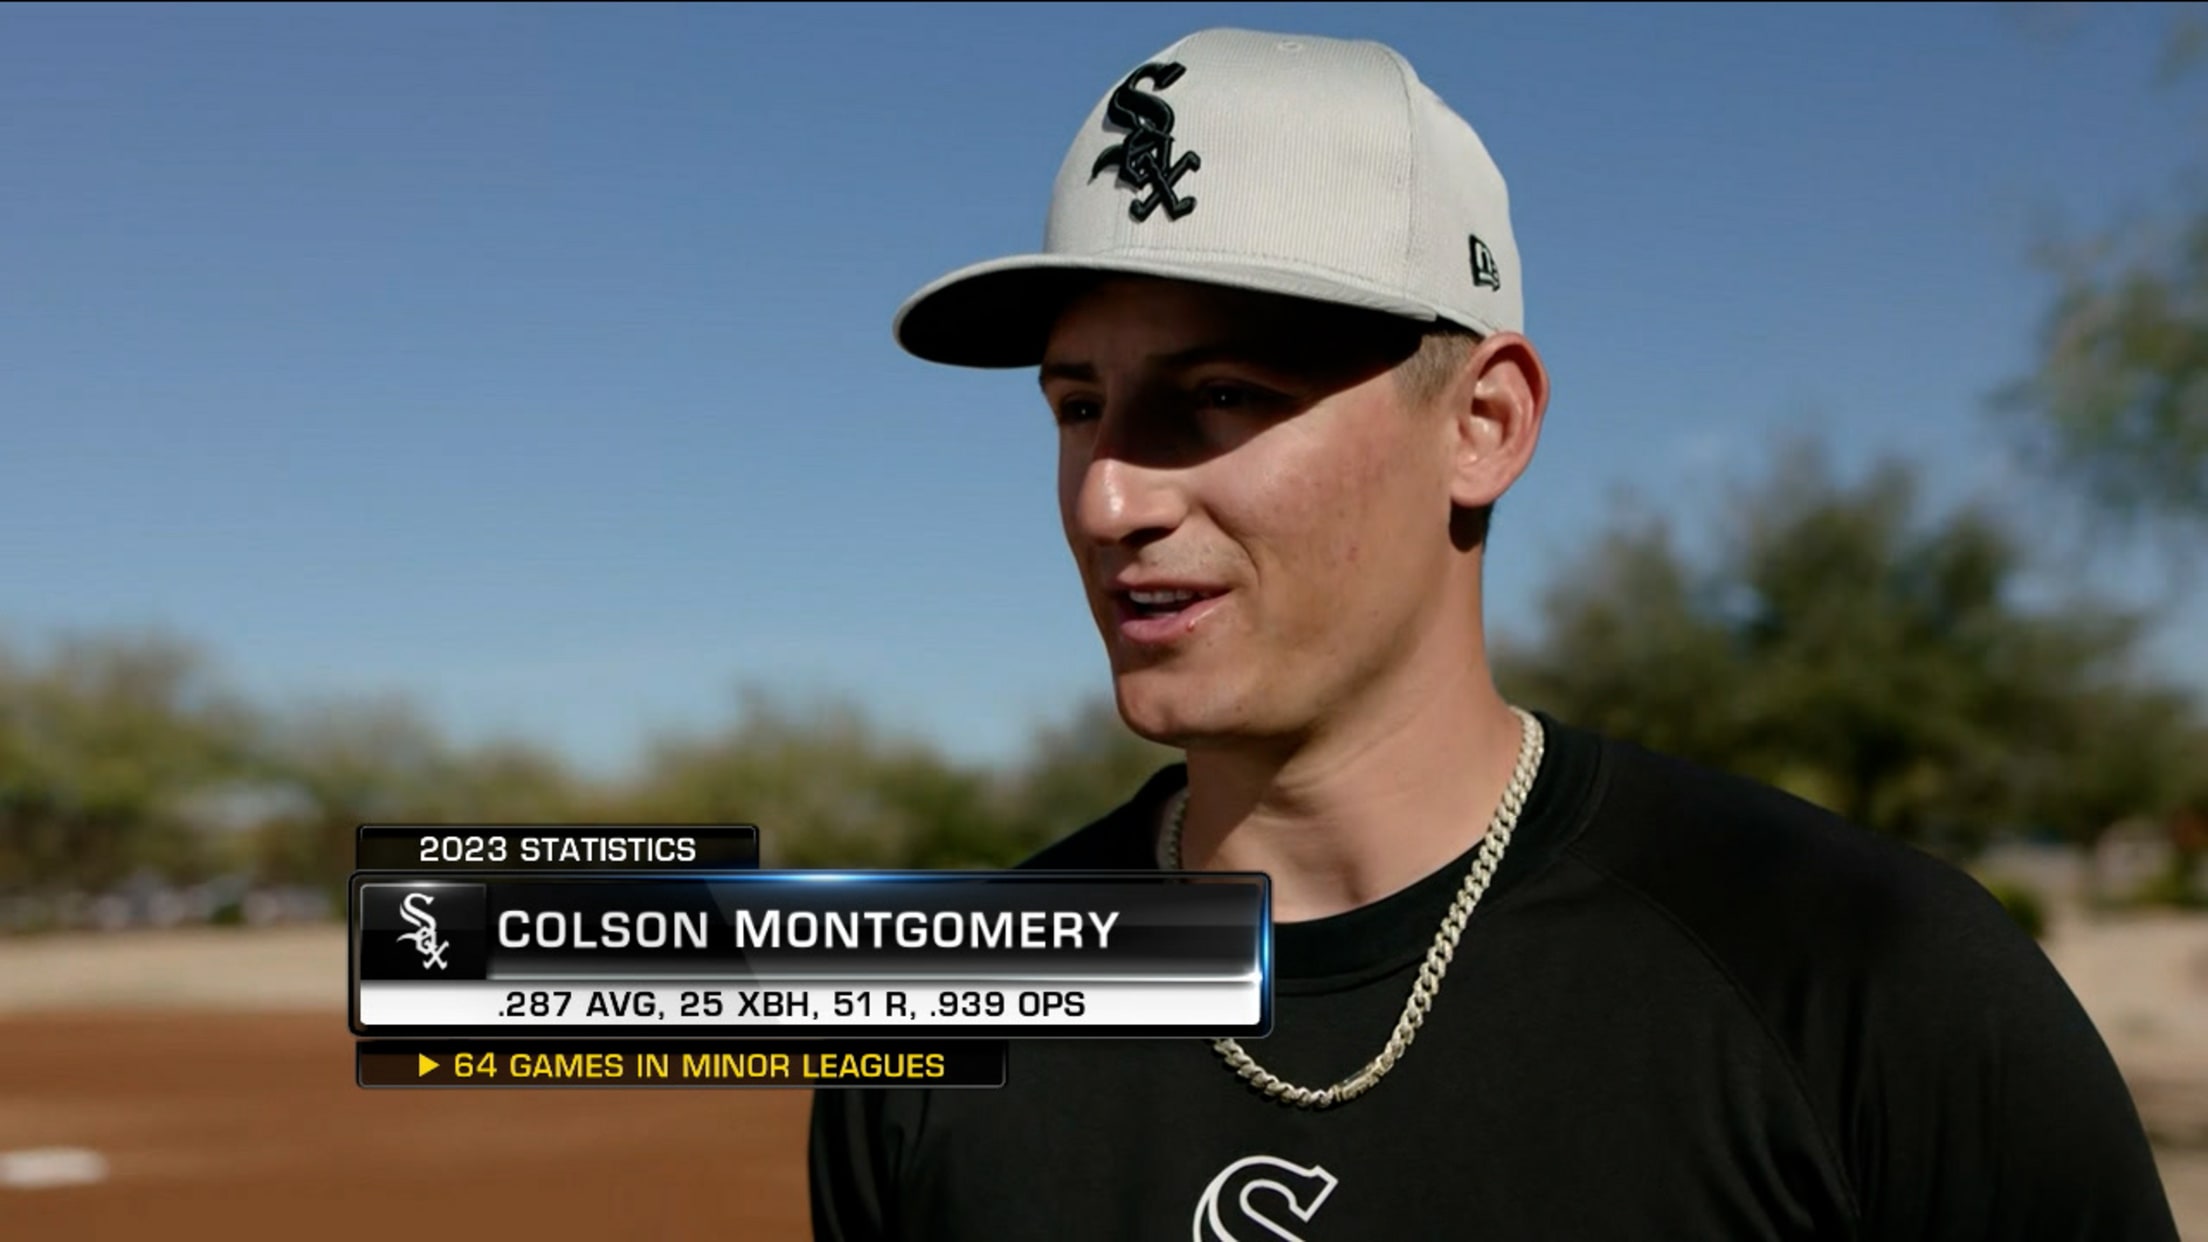 Colson Montgomery being doubted because of his size